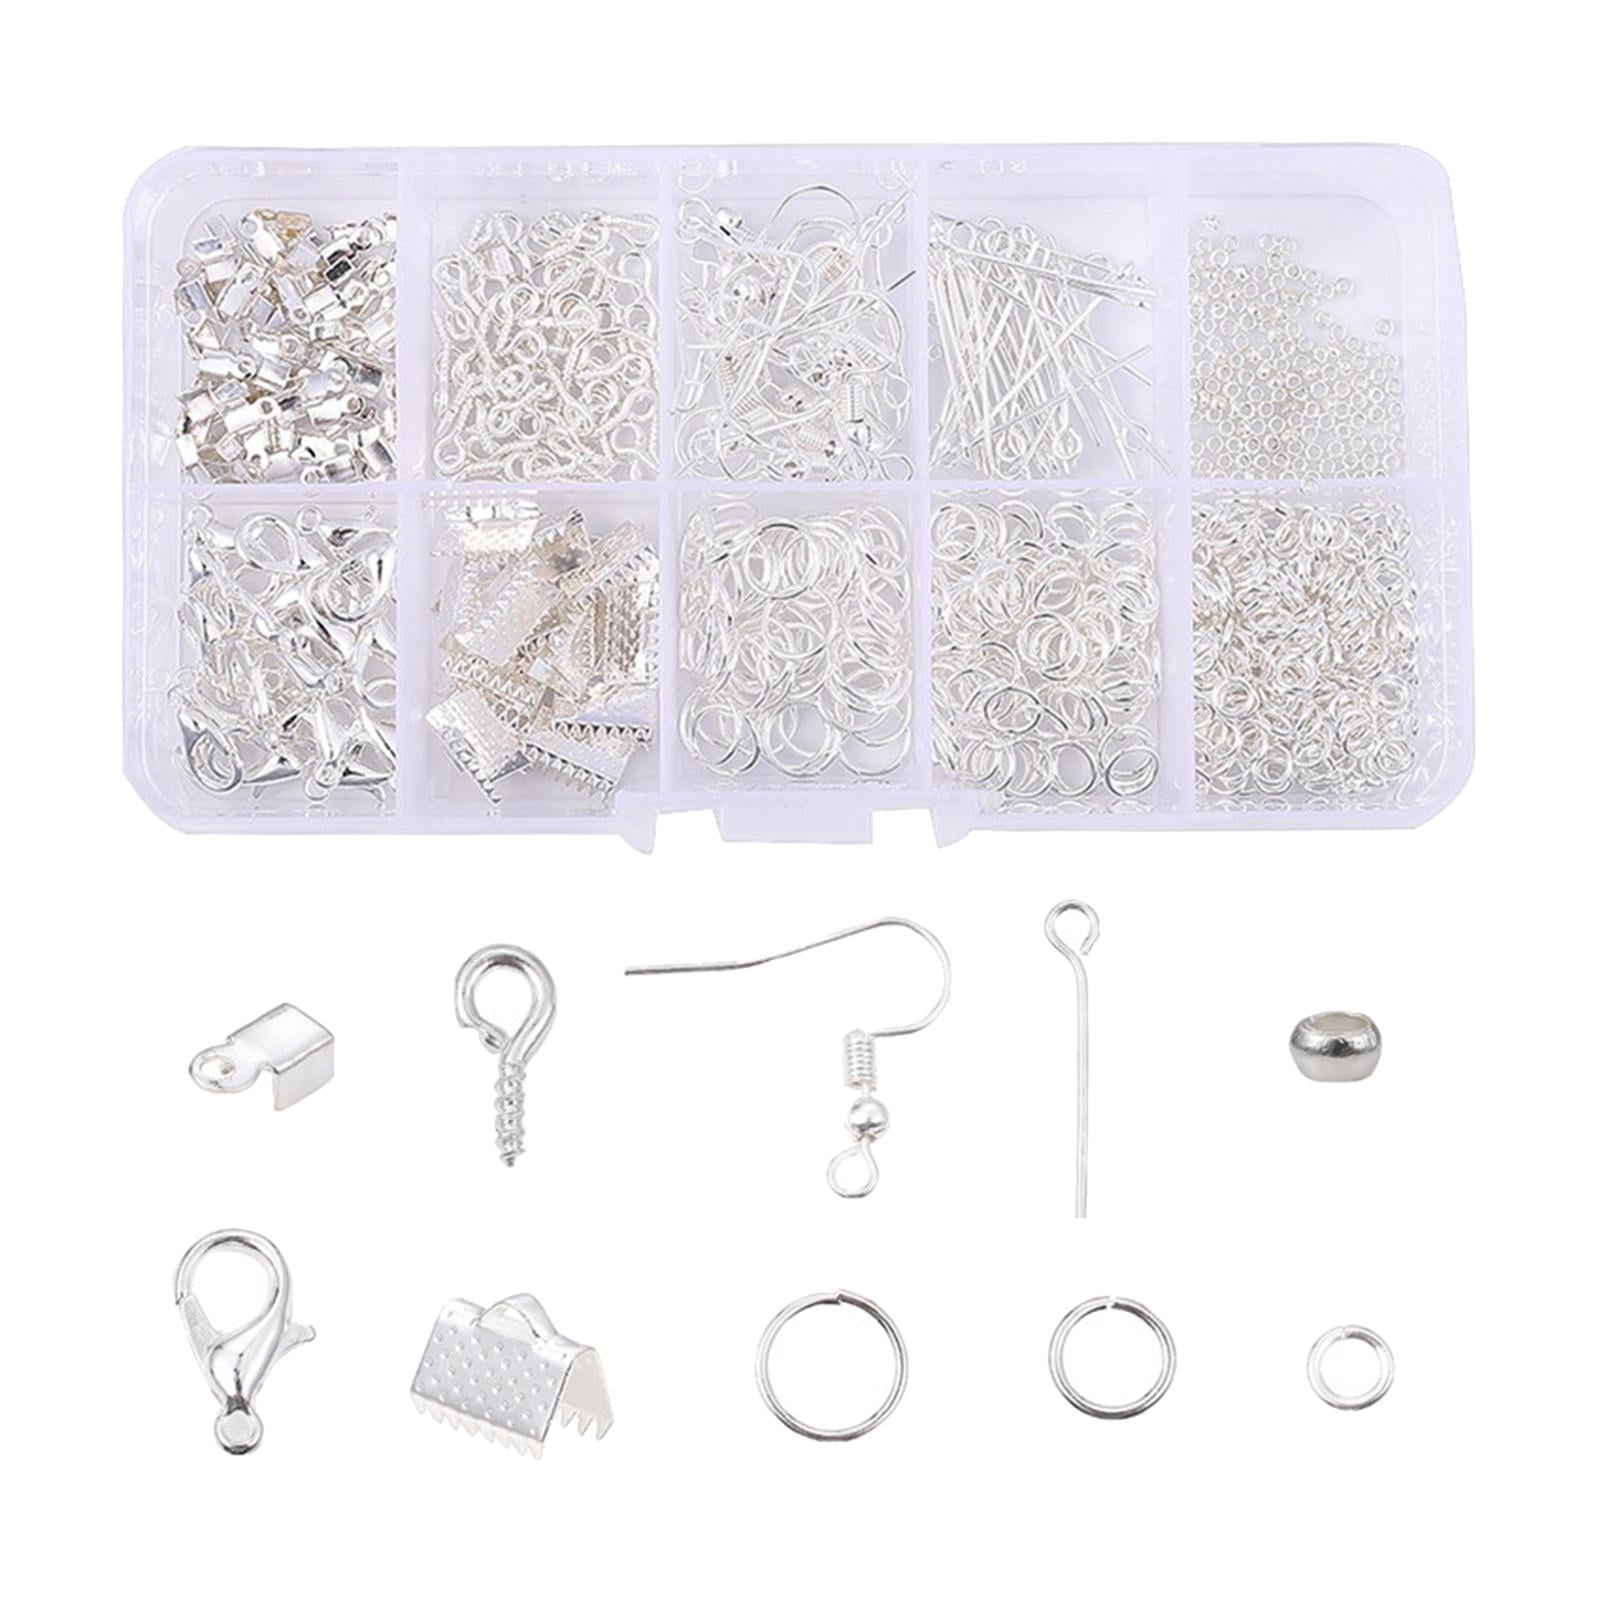 Jewelry Findings Set, Jewelry Making Kit, Lobster Clasps, Jump Rings,  Ribbon Ends, Ribbon Clamp Crimps, Bead Caps, Pins, Hooks, Hoops